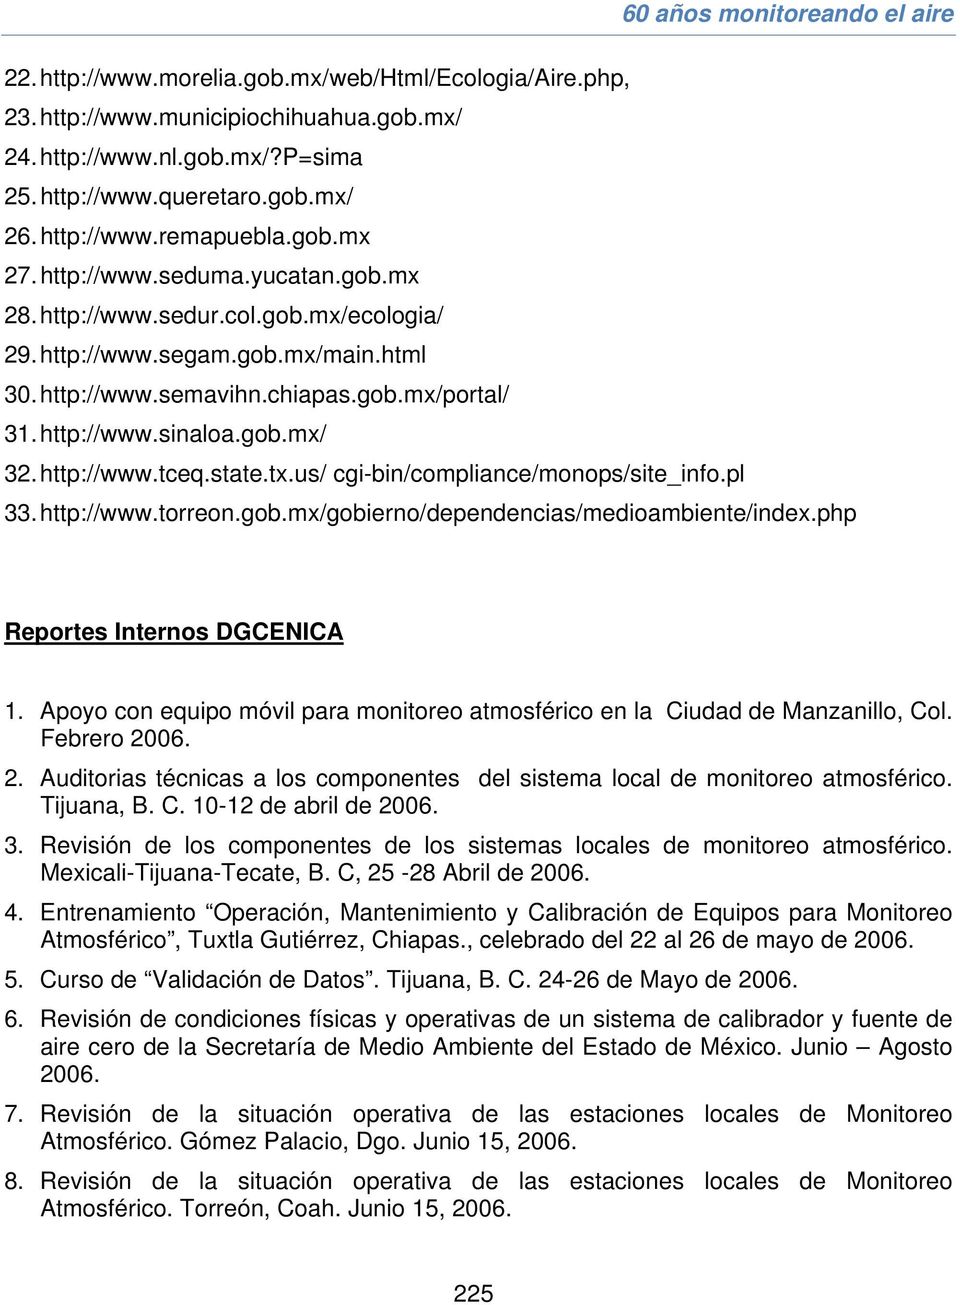 http://www.tceq.state.tx.us/ cgi-bin/compliance/monops/site_info.pl 33. http://www.torreon.gob.mx/gobierno/dependencias/medioambiente/index.php Reportes Internos DGCENICA 1.